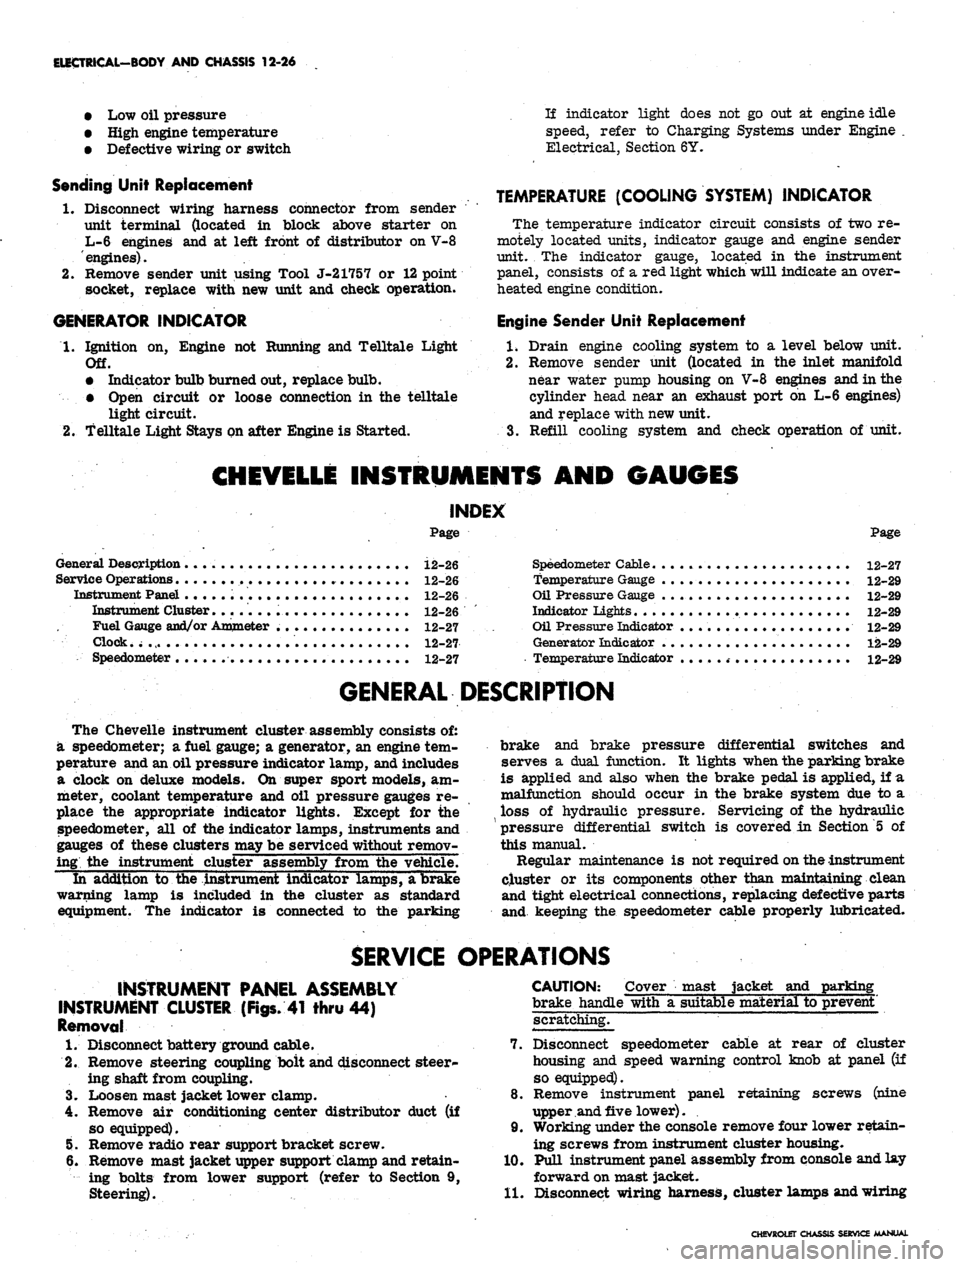 CHEVROLET CAMARO 1967 1.G Chassis Workshop Manual 
ELECTRICAL-BODY
 AND
 CHASSIS
 12-26

•
 Low oil
 pressure

• High engine temperature

• Defective wiring
 or
 switch

connector from sender

in block above starter
 on

and
 at
 left front
 of